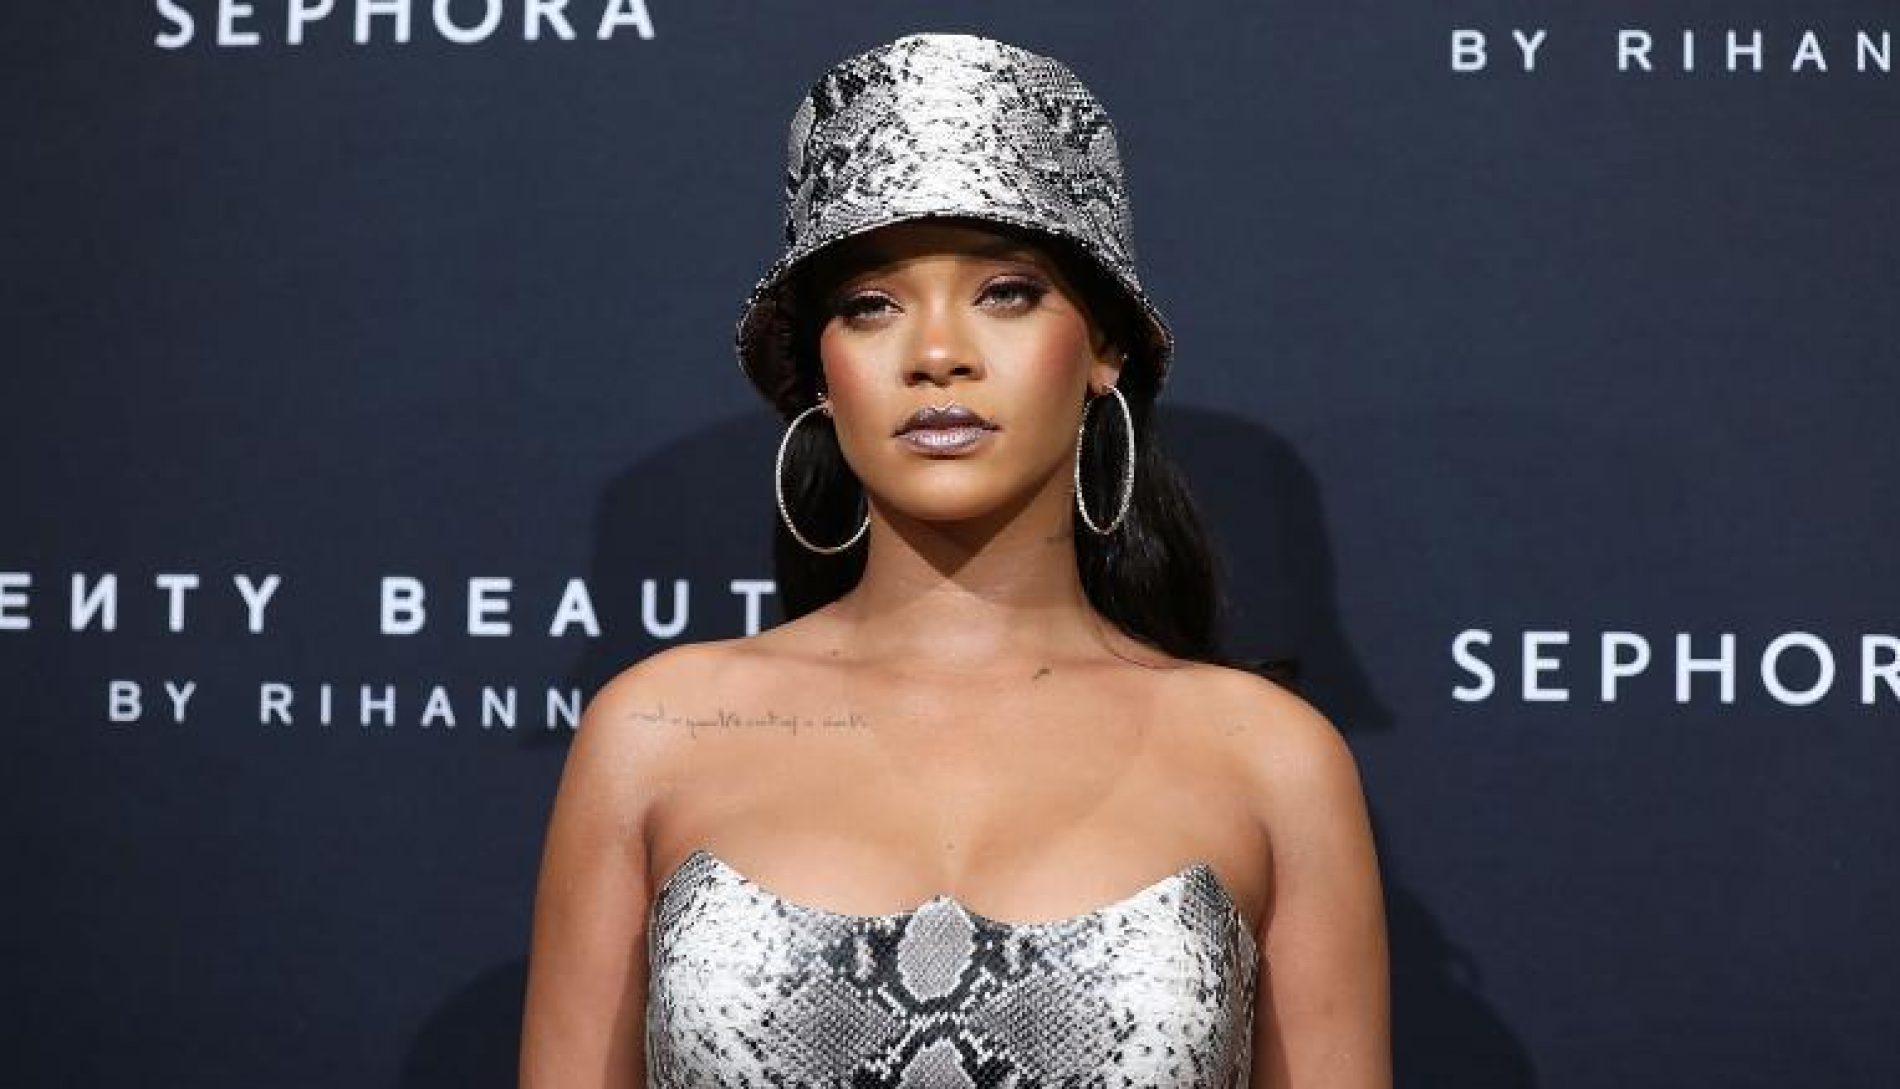 Rihanna Is The World’s Wealthiest Female Musician With A $600 Million Net Worth